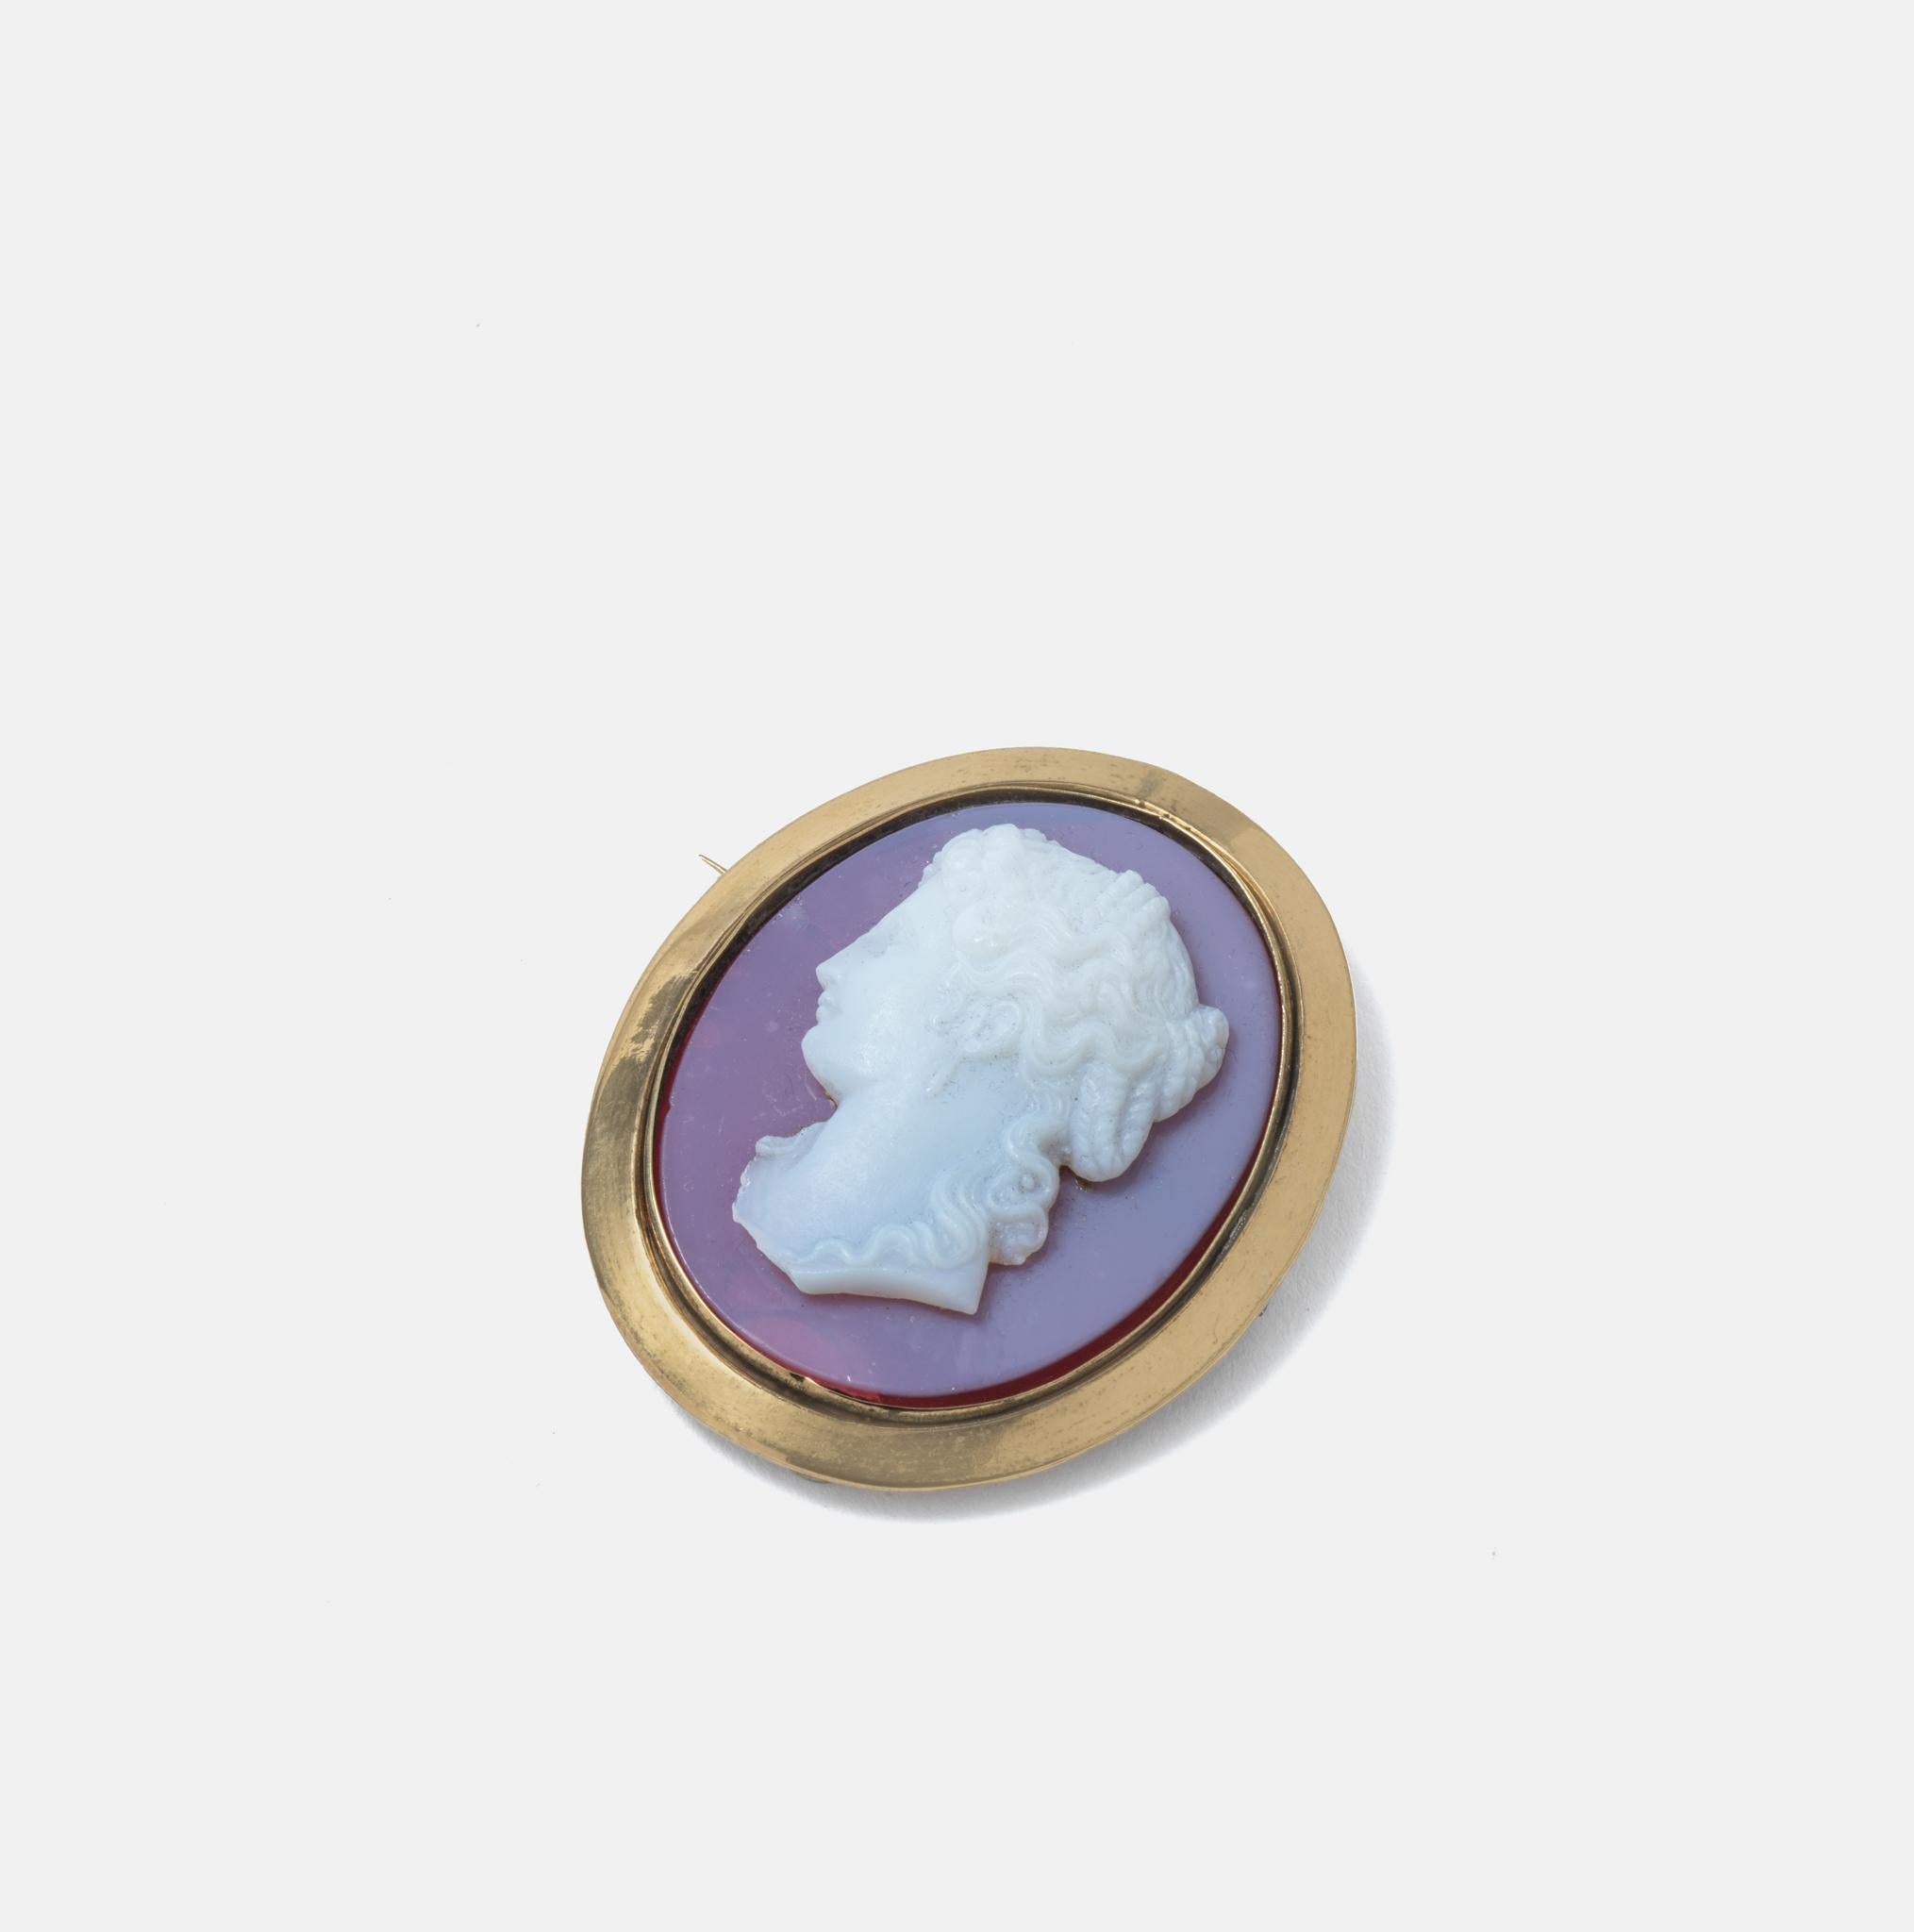 A bright and happy brooch which also can be used as a pendant with a chain. The oval central part is made of glass and has a beautiful woman portrayed in profile, white on a purple background. The frame around is made of gilt brass. Brooches were